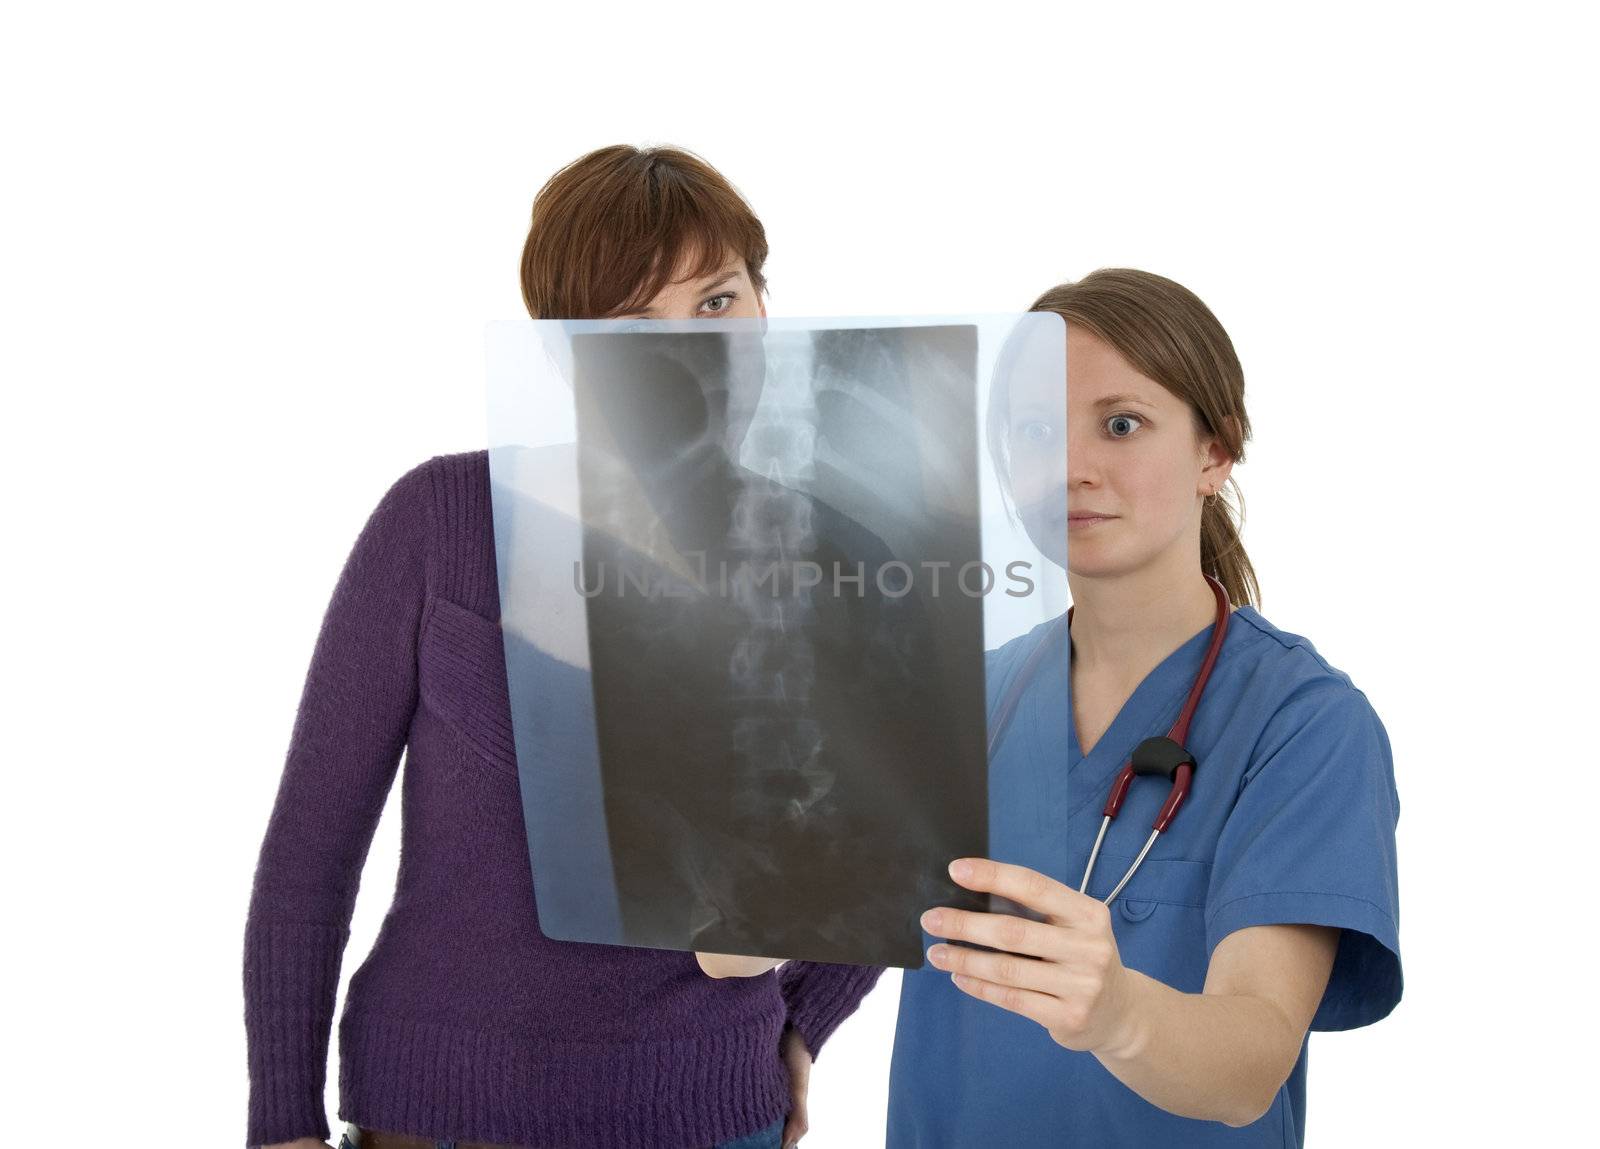 Nurse and patient looking at x-ray with worried expression, on white background.